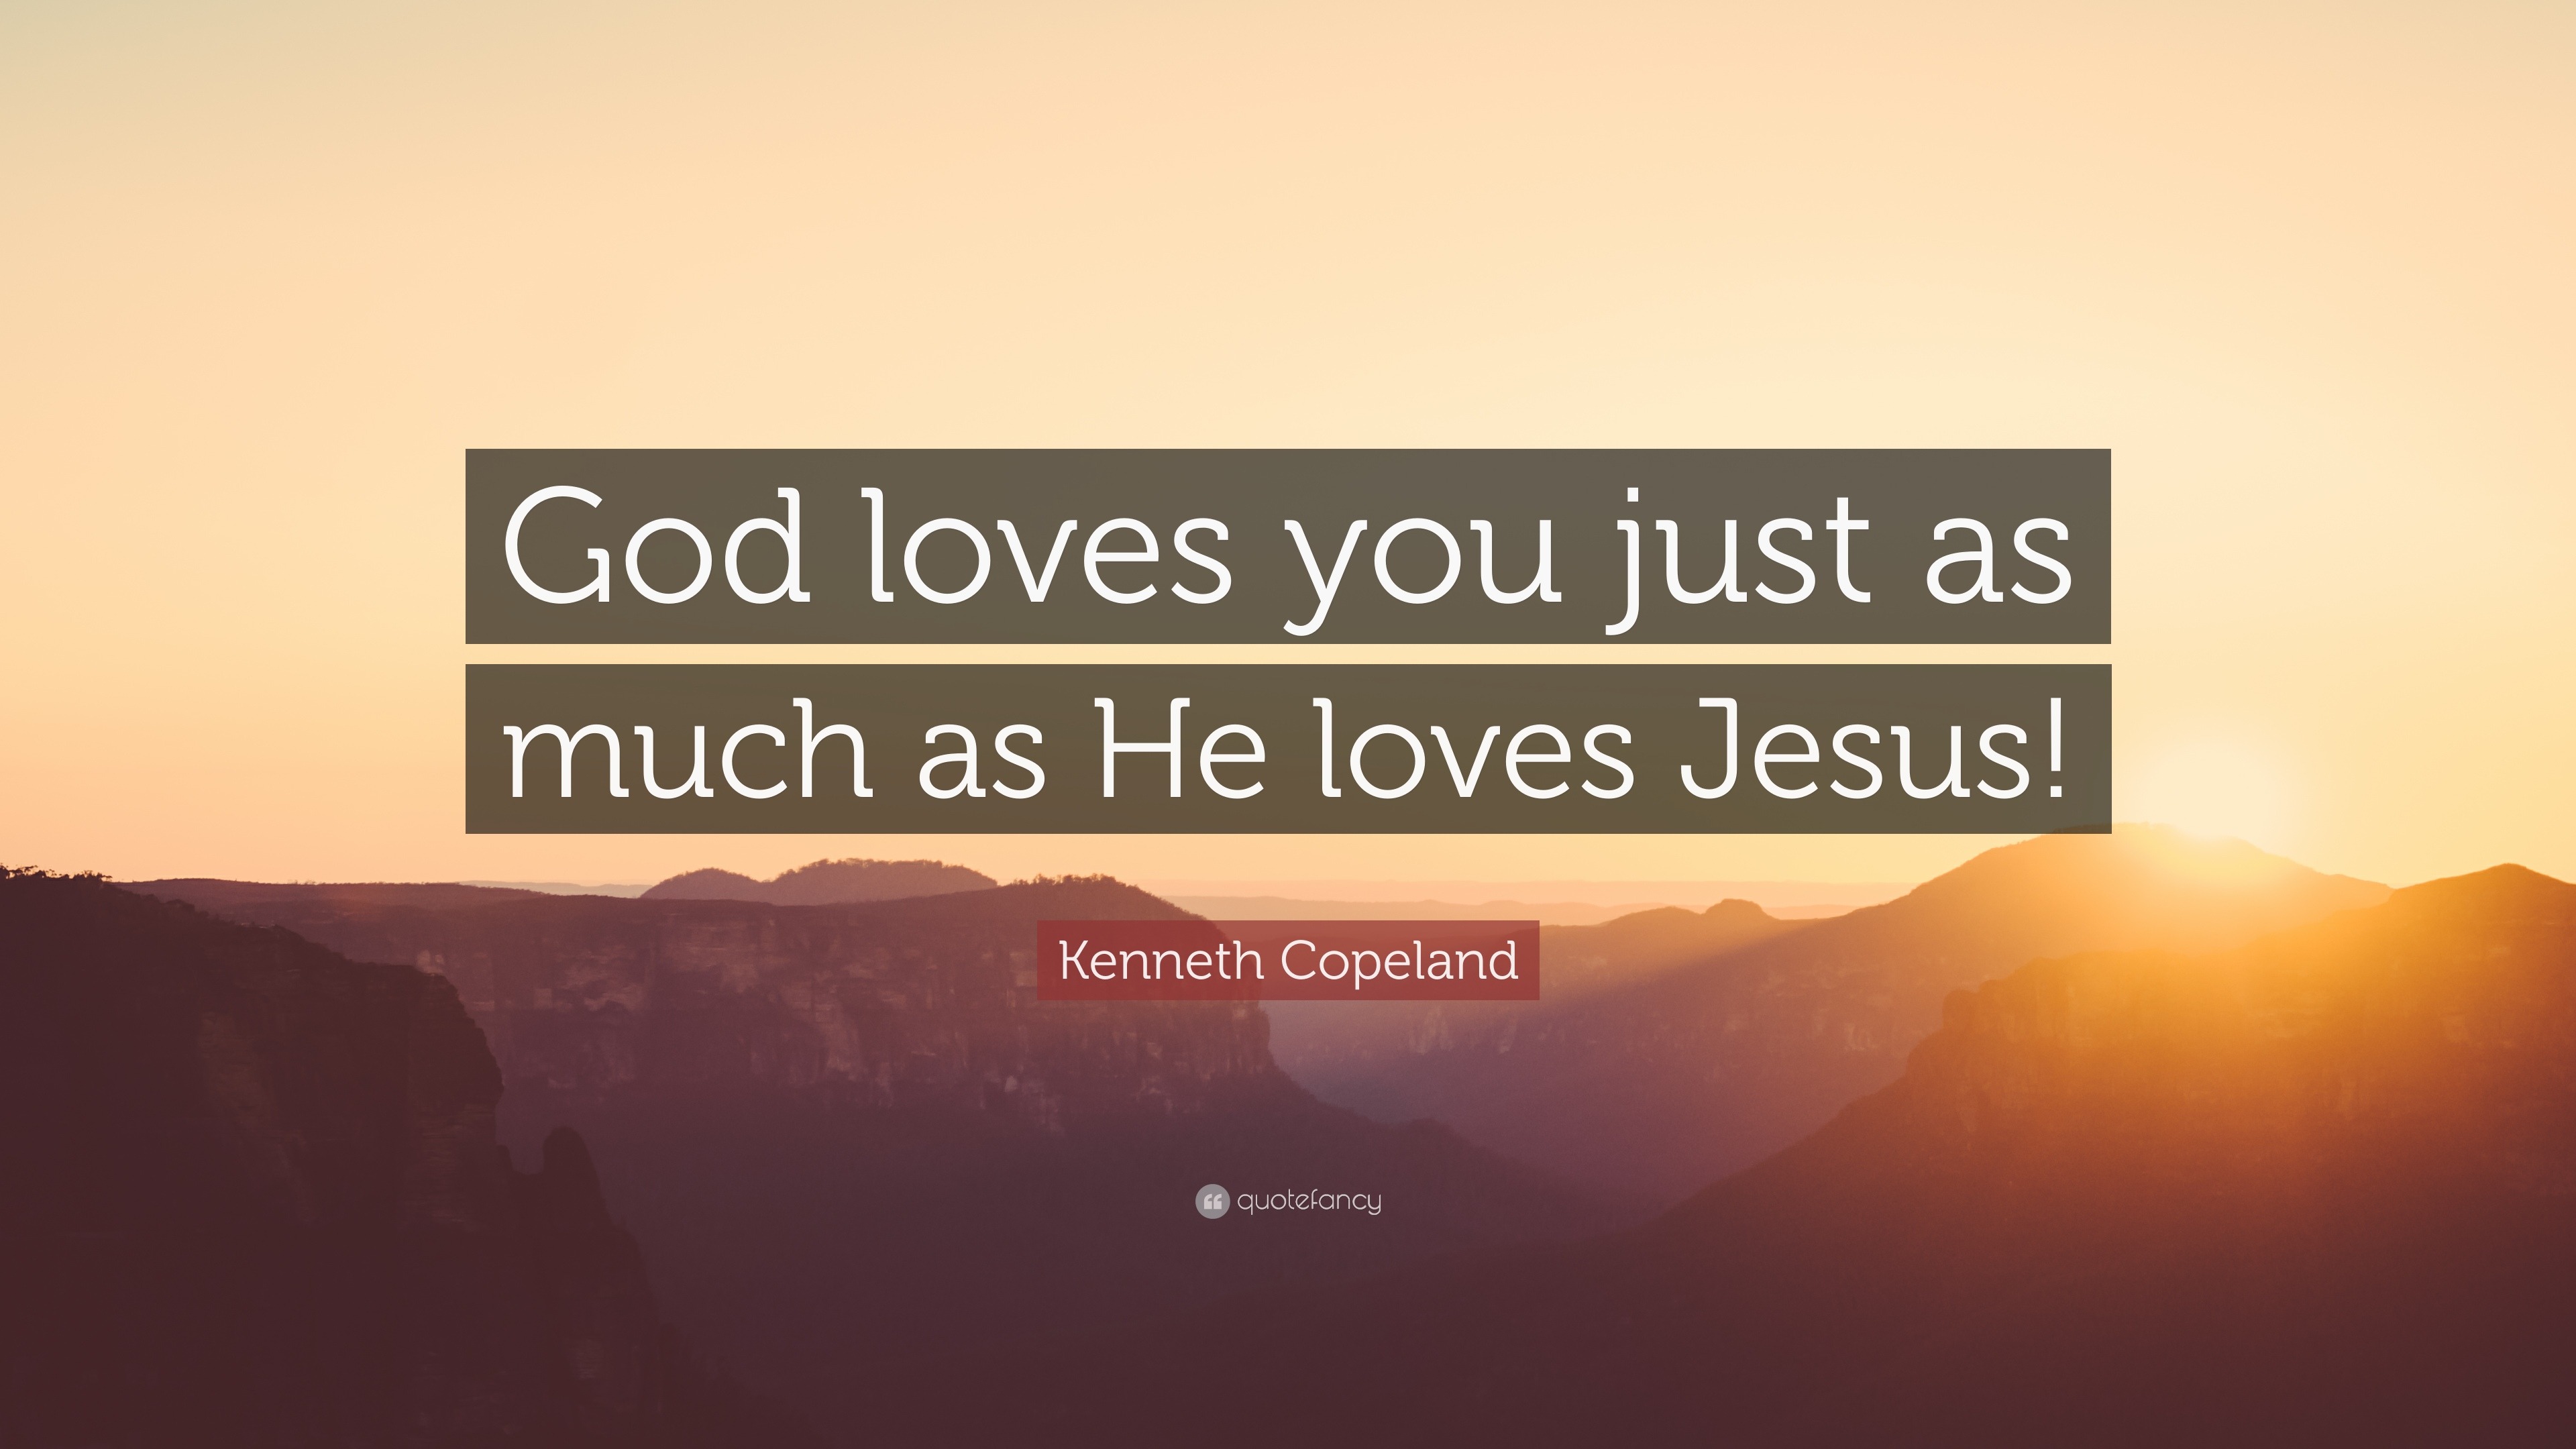 Kenneth Copeland Quote “God loves you just as much as He loves Jesus